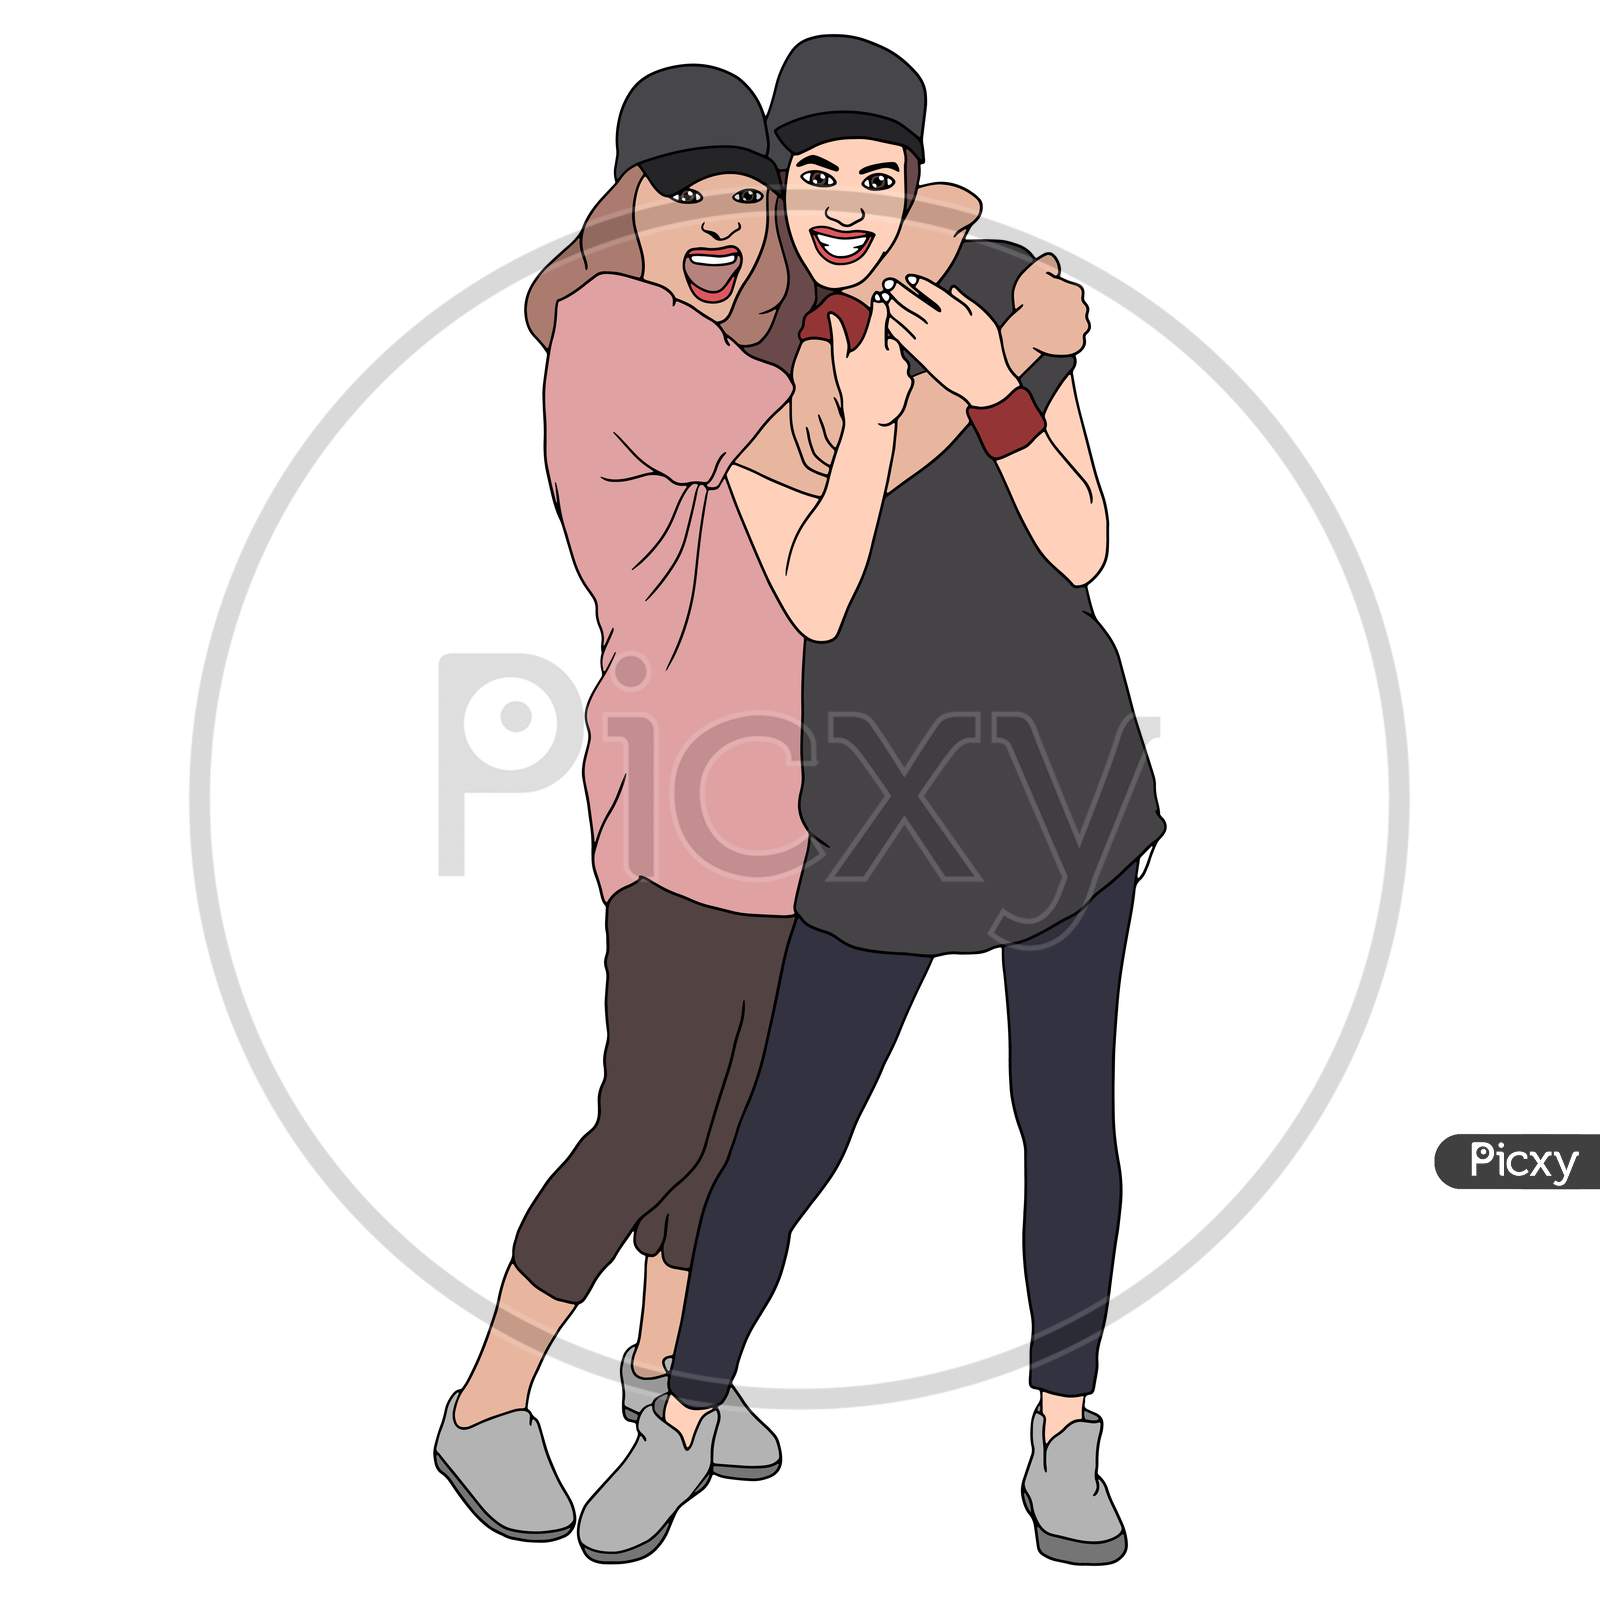 A Girl Hugs The Girl From Behind, Happy Friends Moment, Flat Colorful Illustration Of People For Friendship Day. Hand-Drawn Character Illustration Of Happy People.